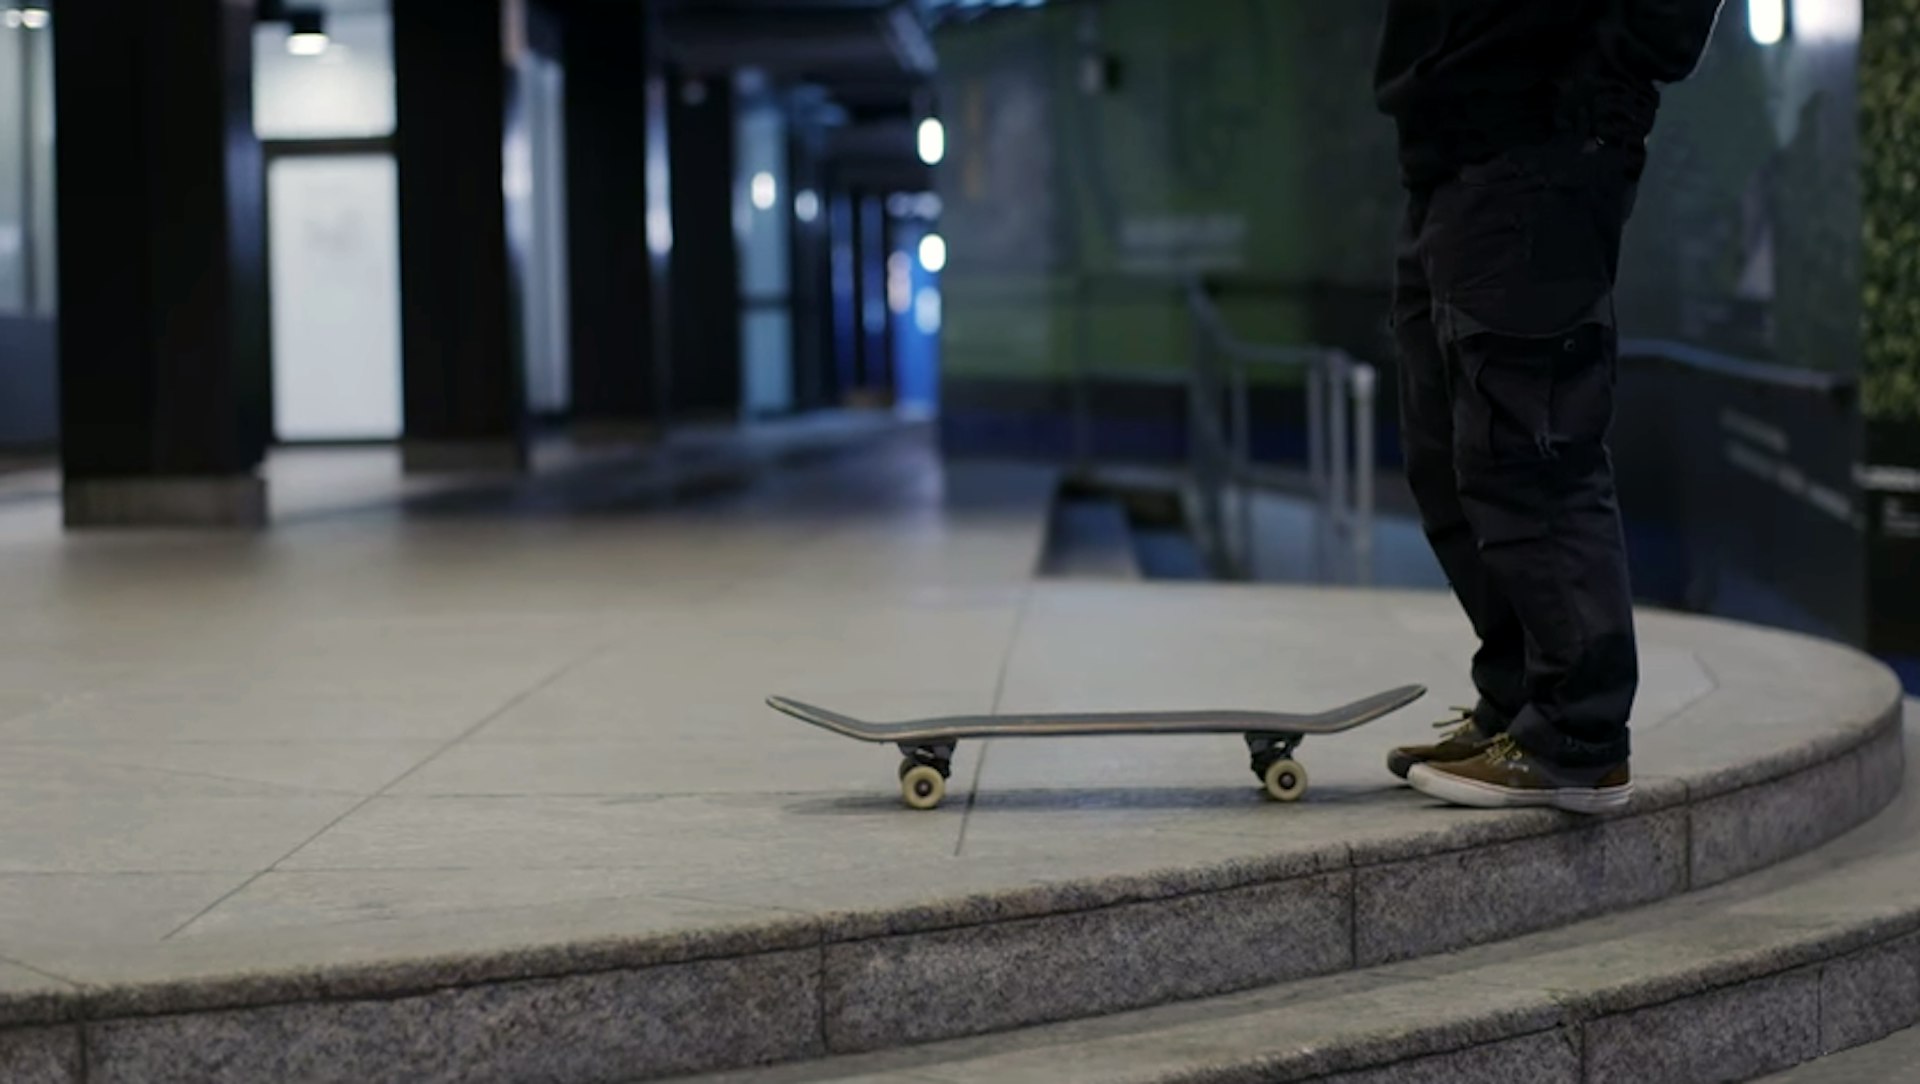 London skaters shoot the city in darkness with new low-light camera